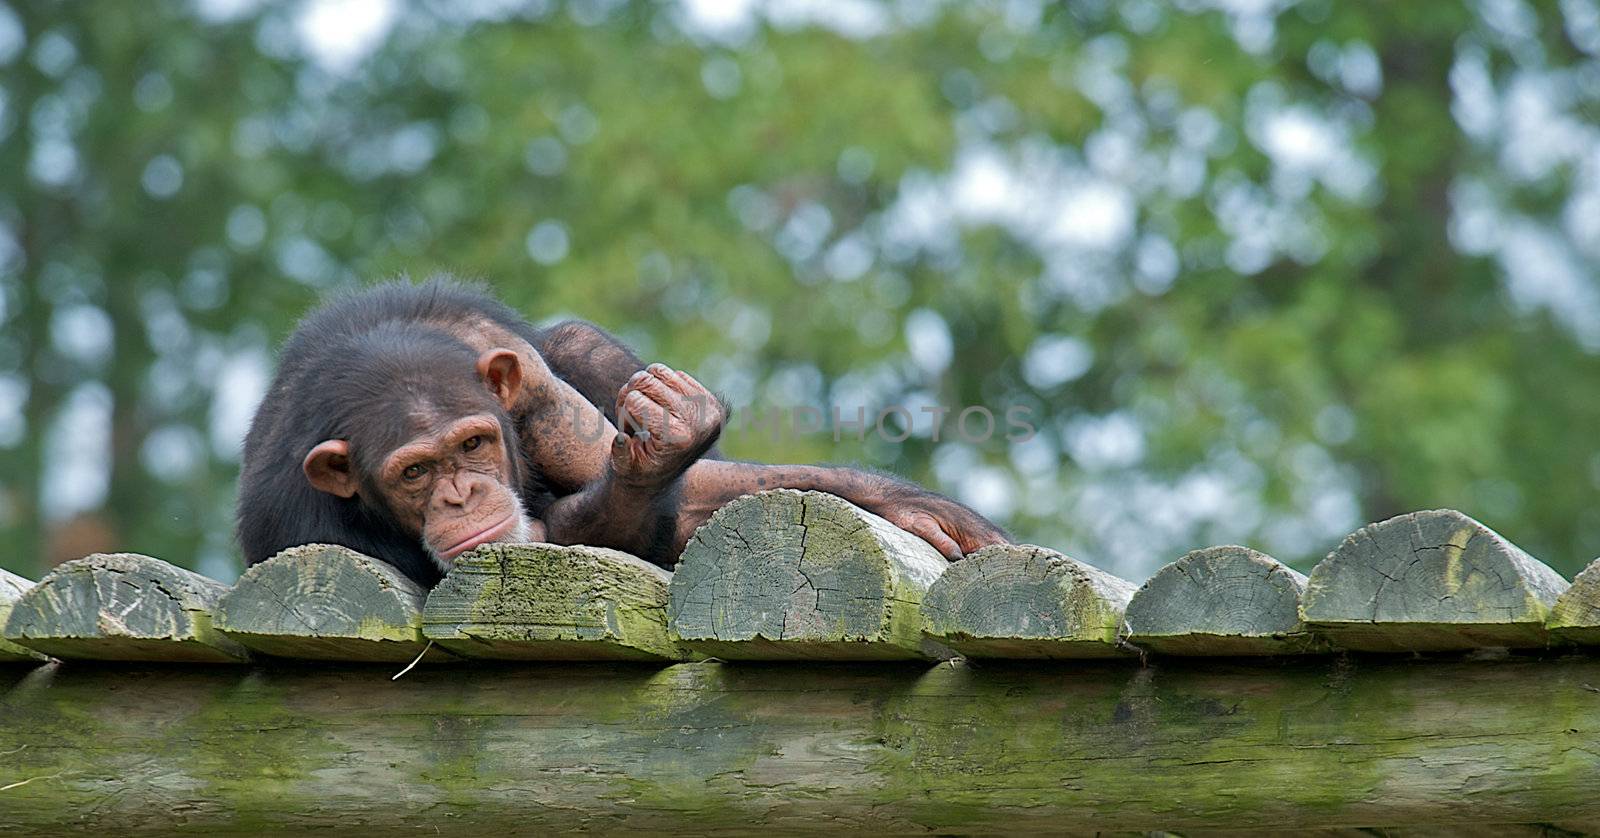 Chimpanzee laying down with a sad expression on his face.